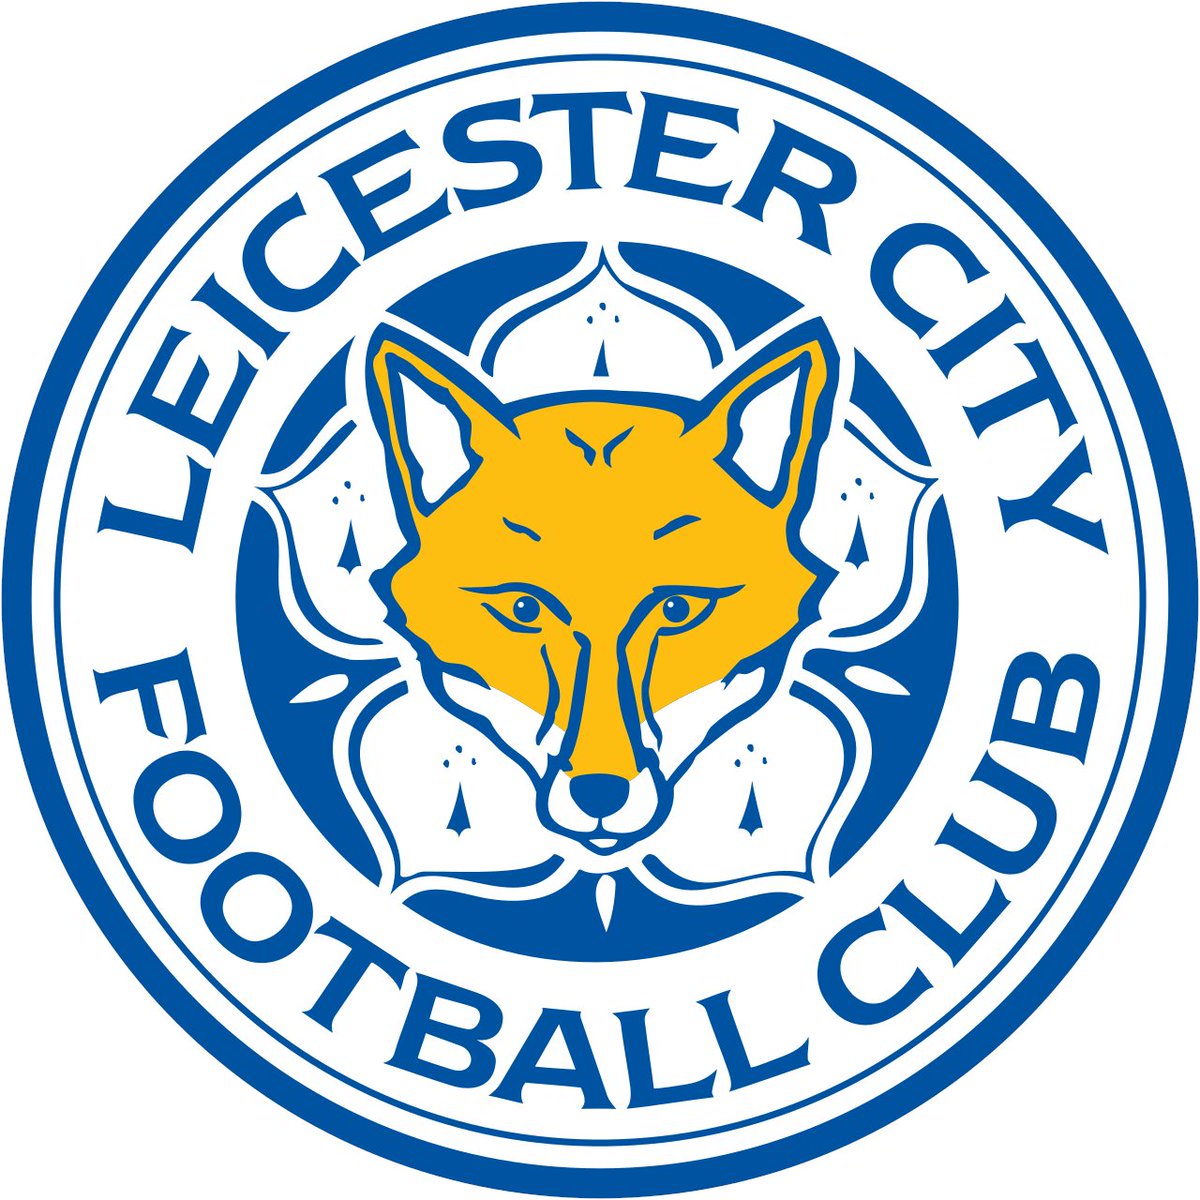 Congratulations to Leicester City FC on their promotion back to the Premier League!